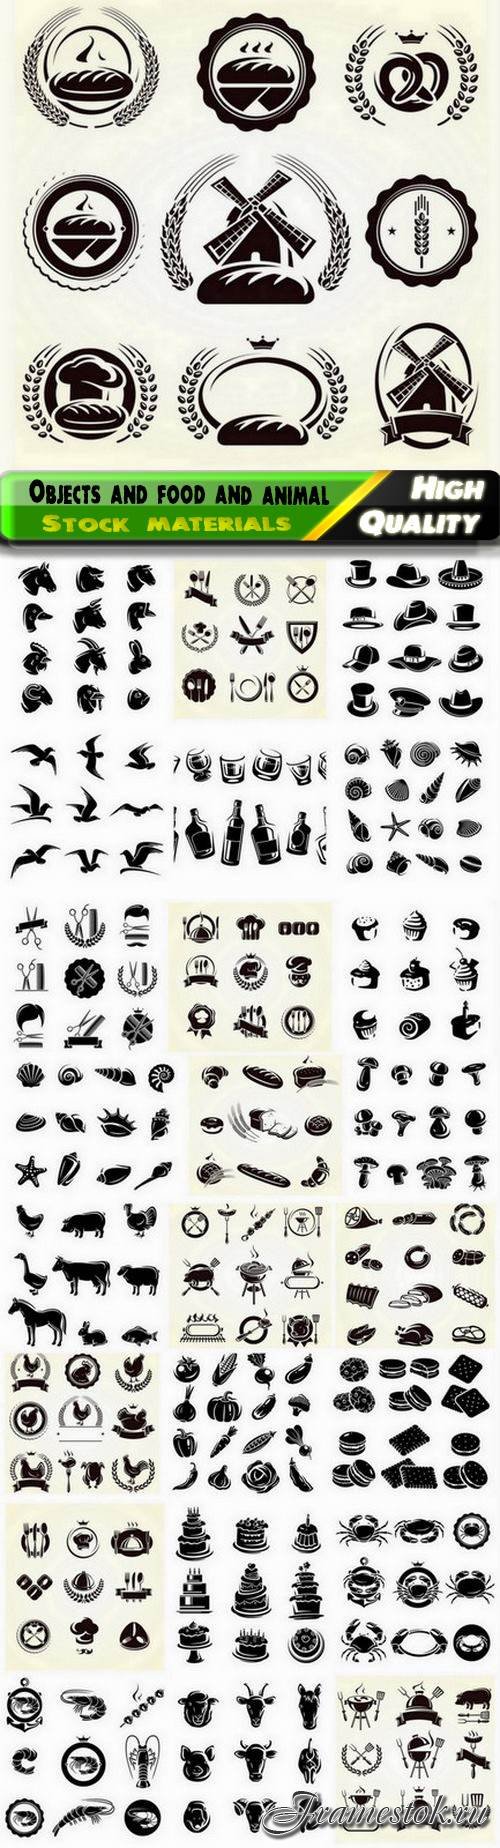 Set of different objects and food and animal icon silhouettes - 25 Eps